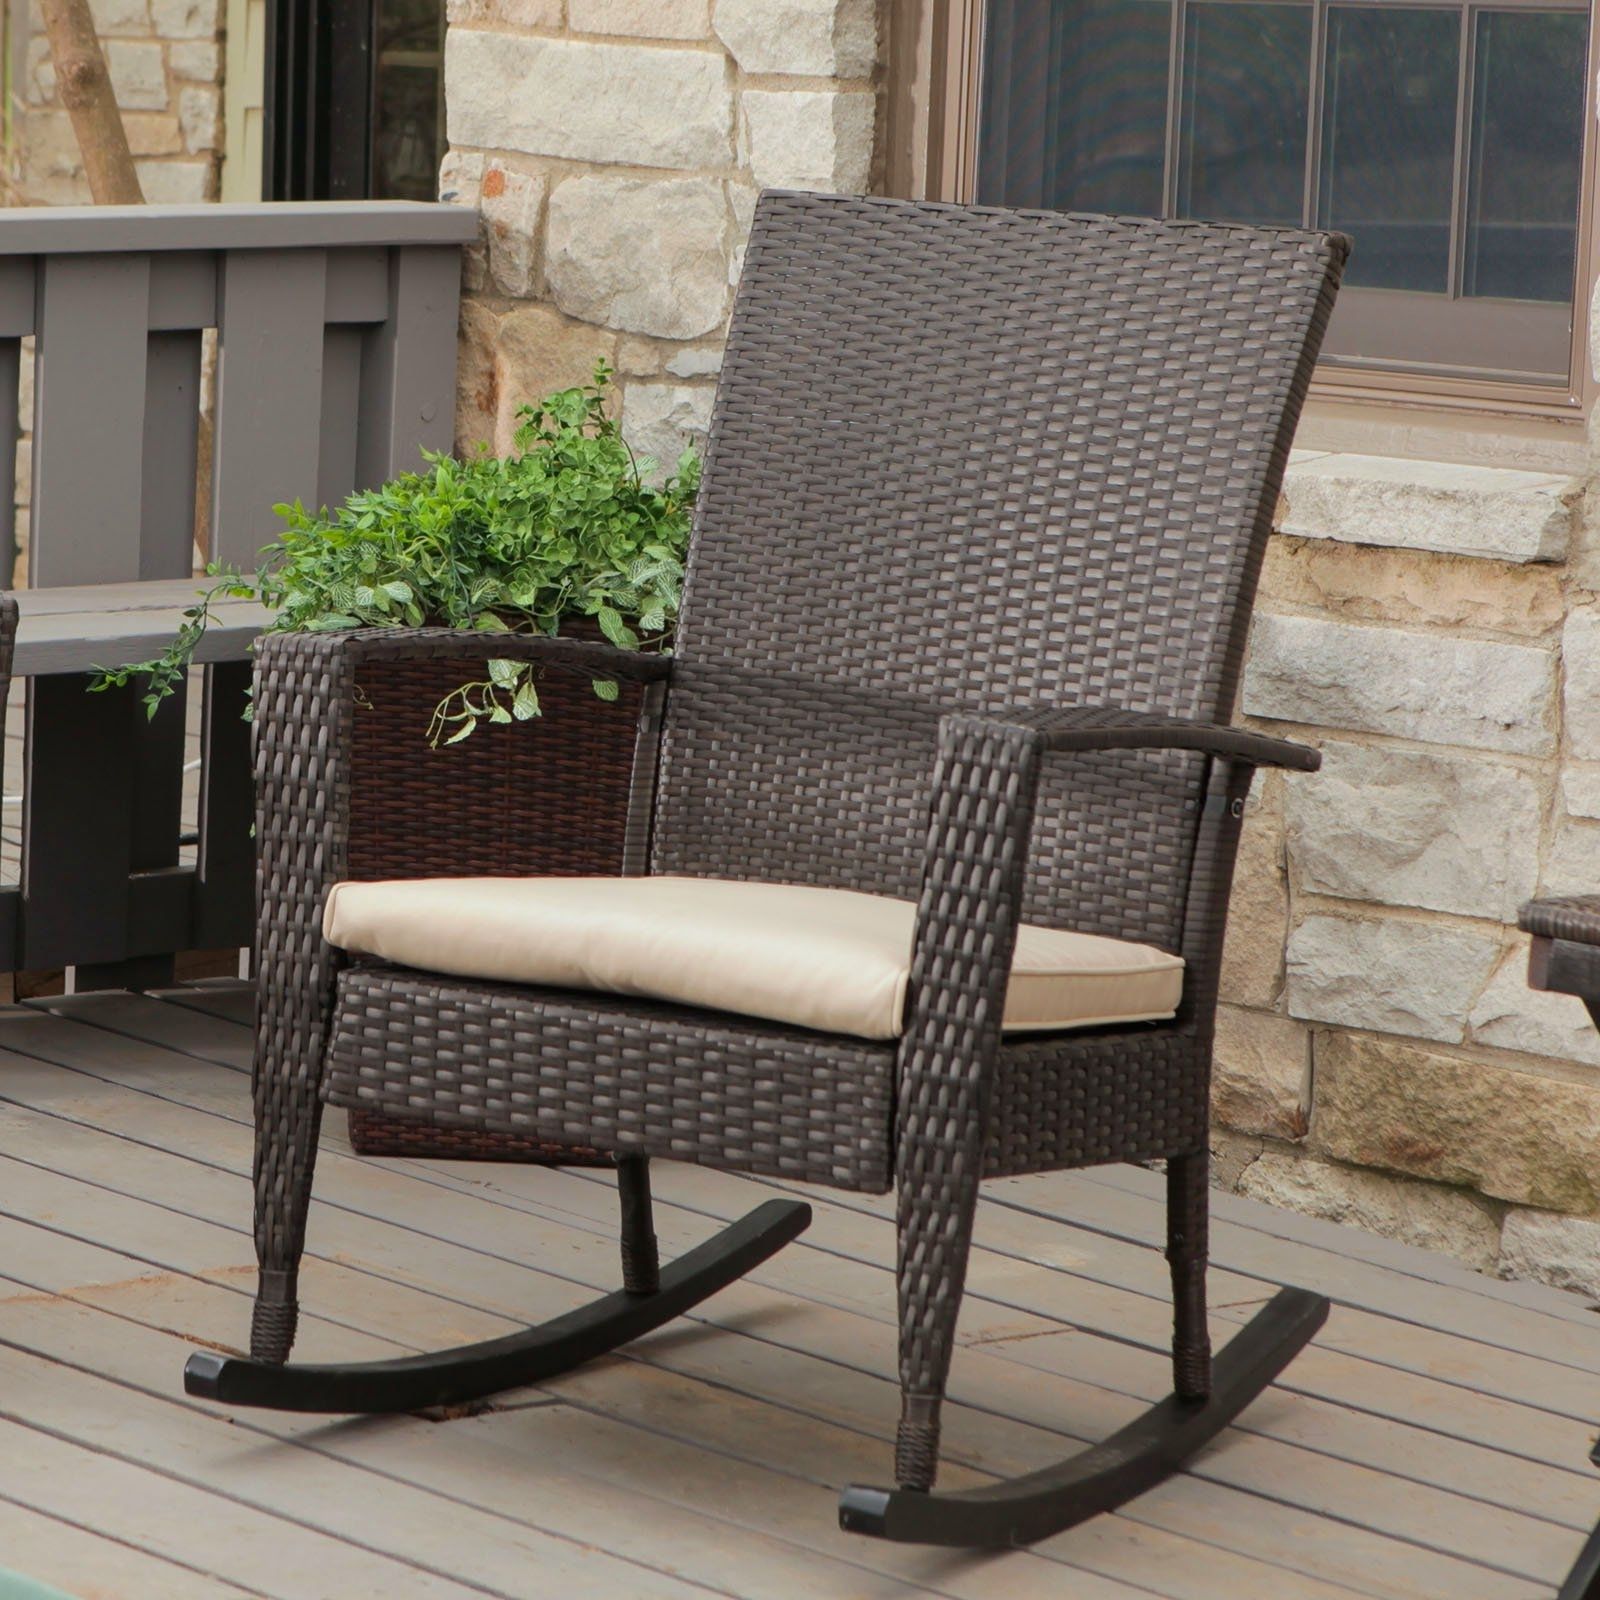 Most Popular Resin Wicker Rocking Chairs With Regard To Outdoor Wicker Rocking Chairs Design — Wilson Home Ideas : How Oil (View 6 of 15)